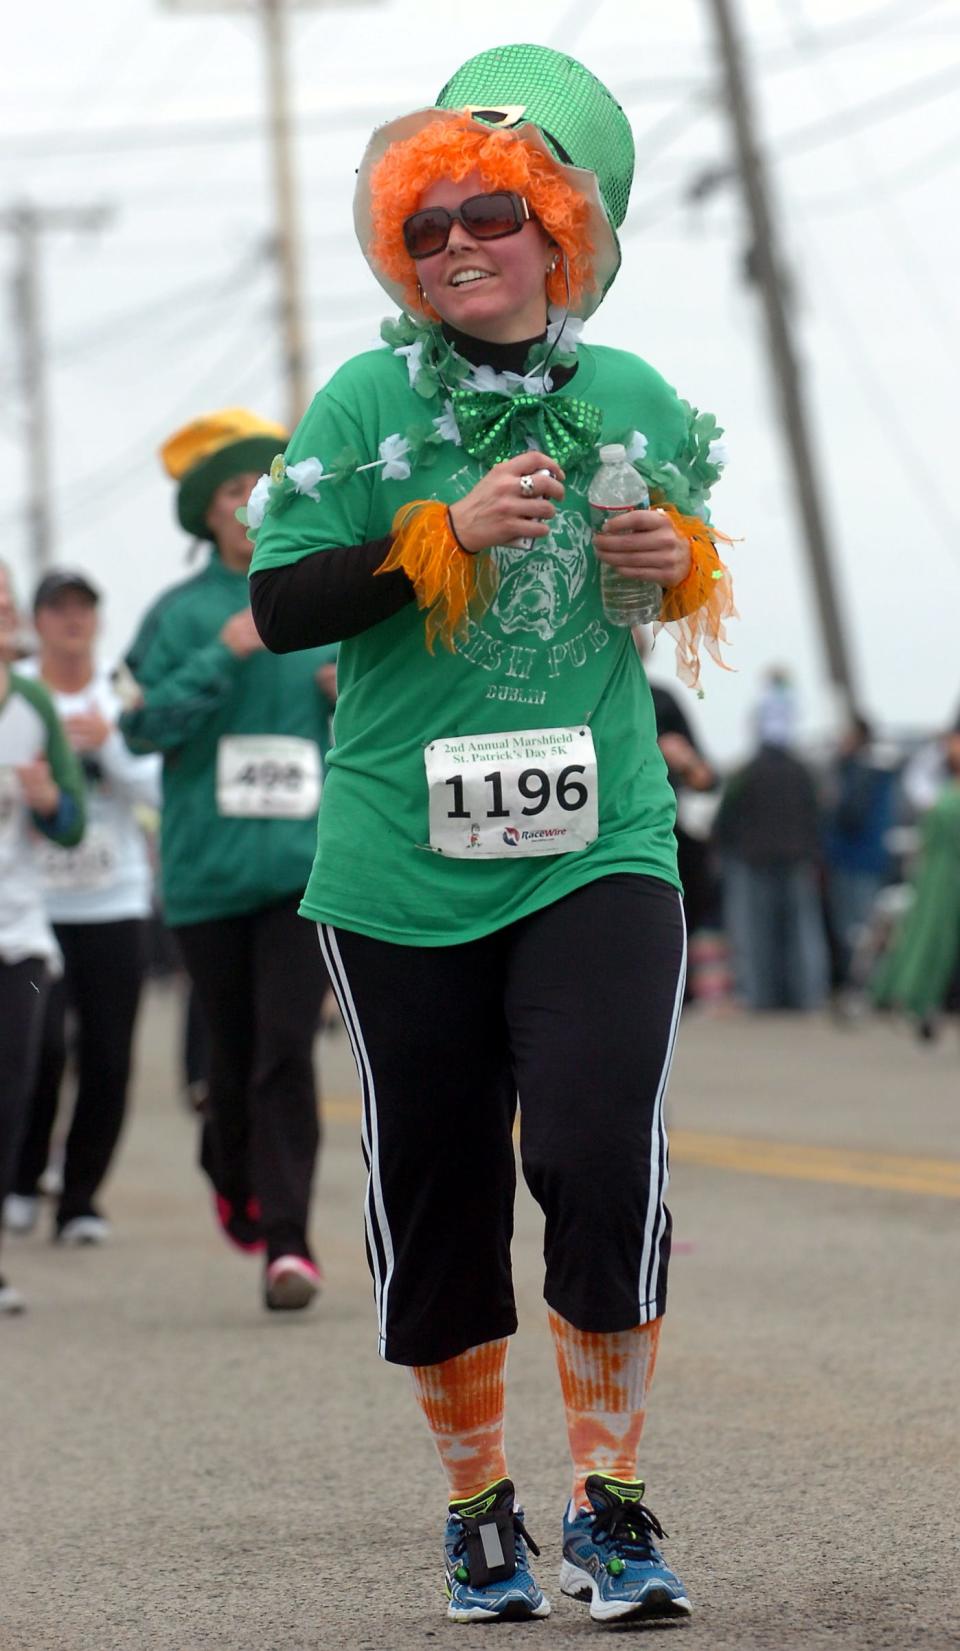 Participants run the second annual St. Patrick's Day 5-K road race in Marshfield, Saturday, March 17, 2012.

photo: Amelia Kunhardt/The Patriot Ledger